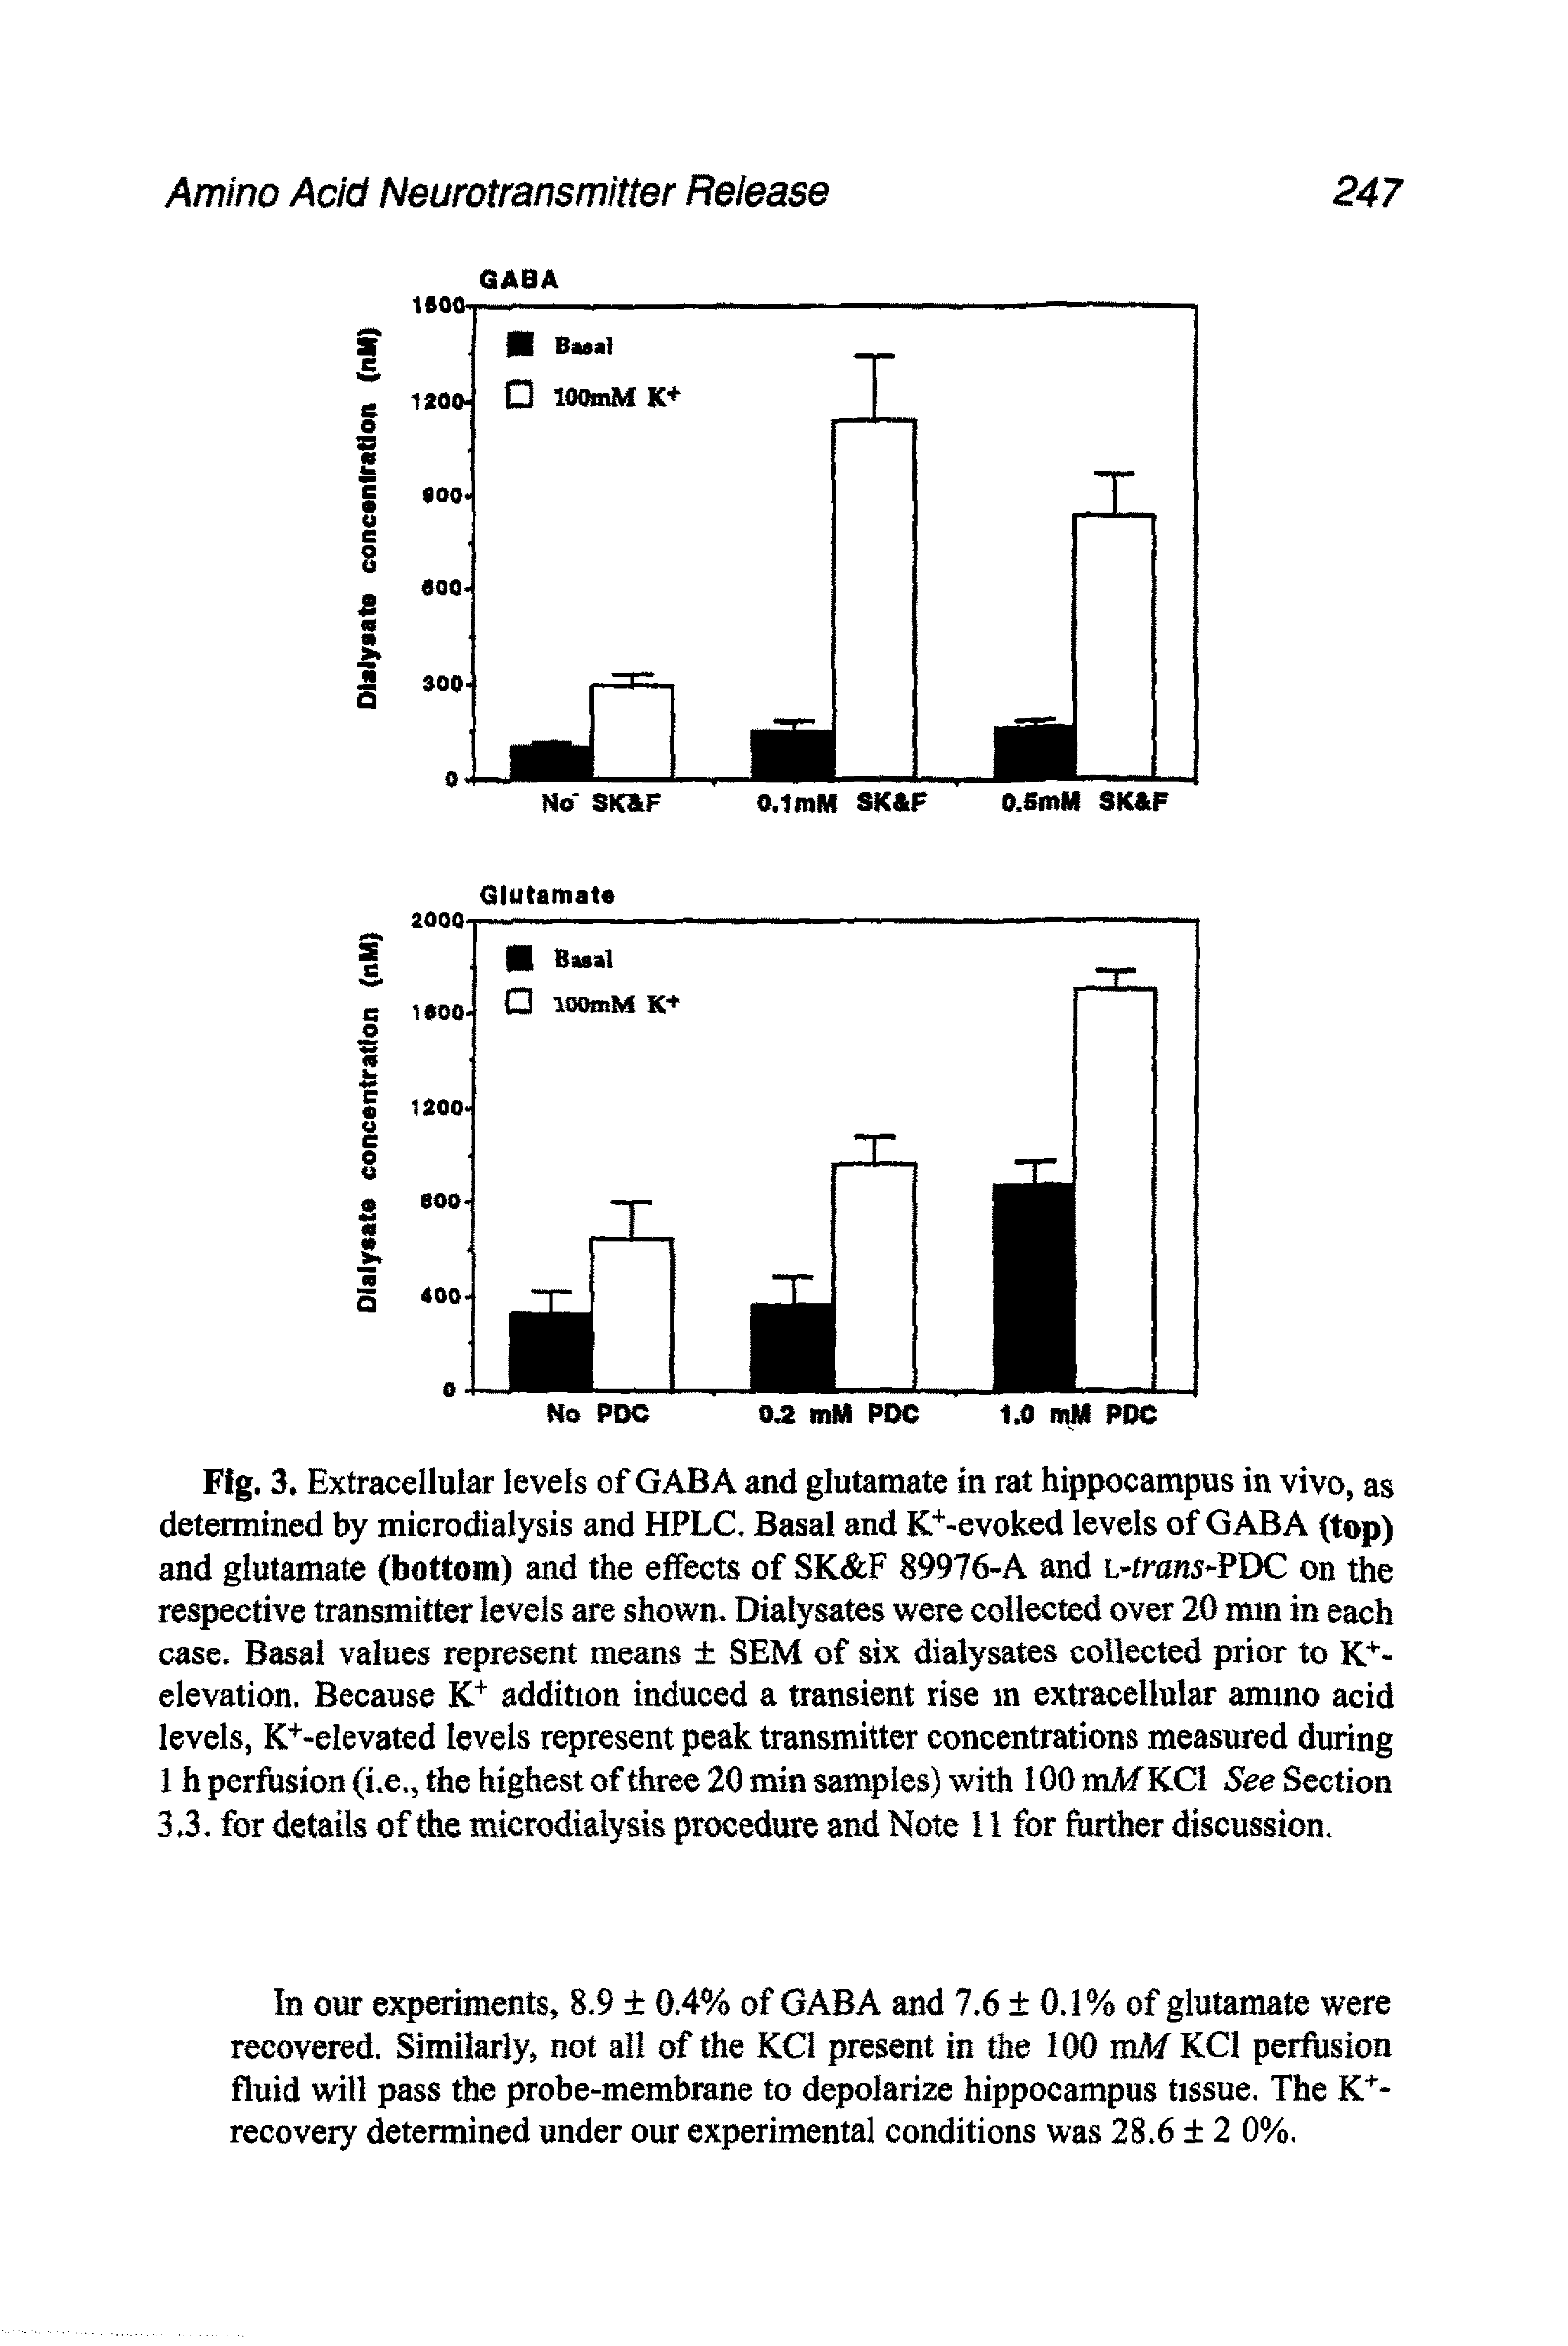 Fig. 3. Extracellular levels of GABA and glutamate in rat hippocampus in vivo, as determined by microdialysis and HPLC. Basal and K -evoked levels of GABA (top) and glutamate (bottom) and the effects of SK F 89976-A and L trau5-PDC on the respective transmitter levels are shown. Dialysates were collected over 20 mm in each case. Basal values represent means SEM of six dialysates collected prior to elevation. Because addition induced a transient rise m extracellular ammo acid levels, K -elevated levels represent peak transmitter concentrations measured during 1 h perfusion (i.e., the highest of three 20 min samples) with 100 mMKCl See Section 3.3. for details of the microdialysis procedure and Note 11 for further discussion.